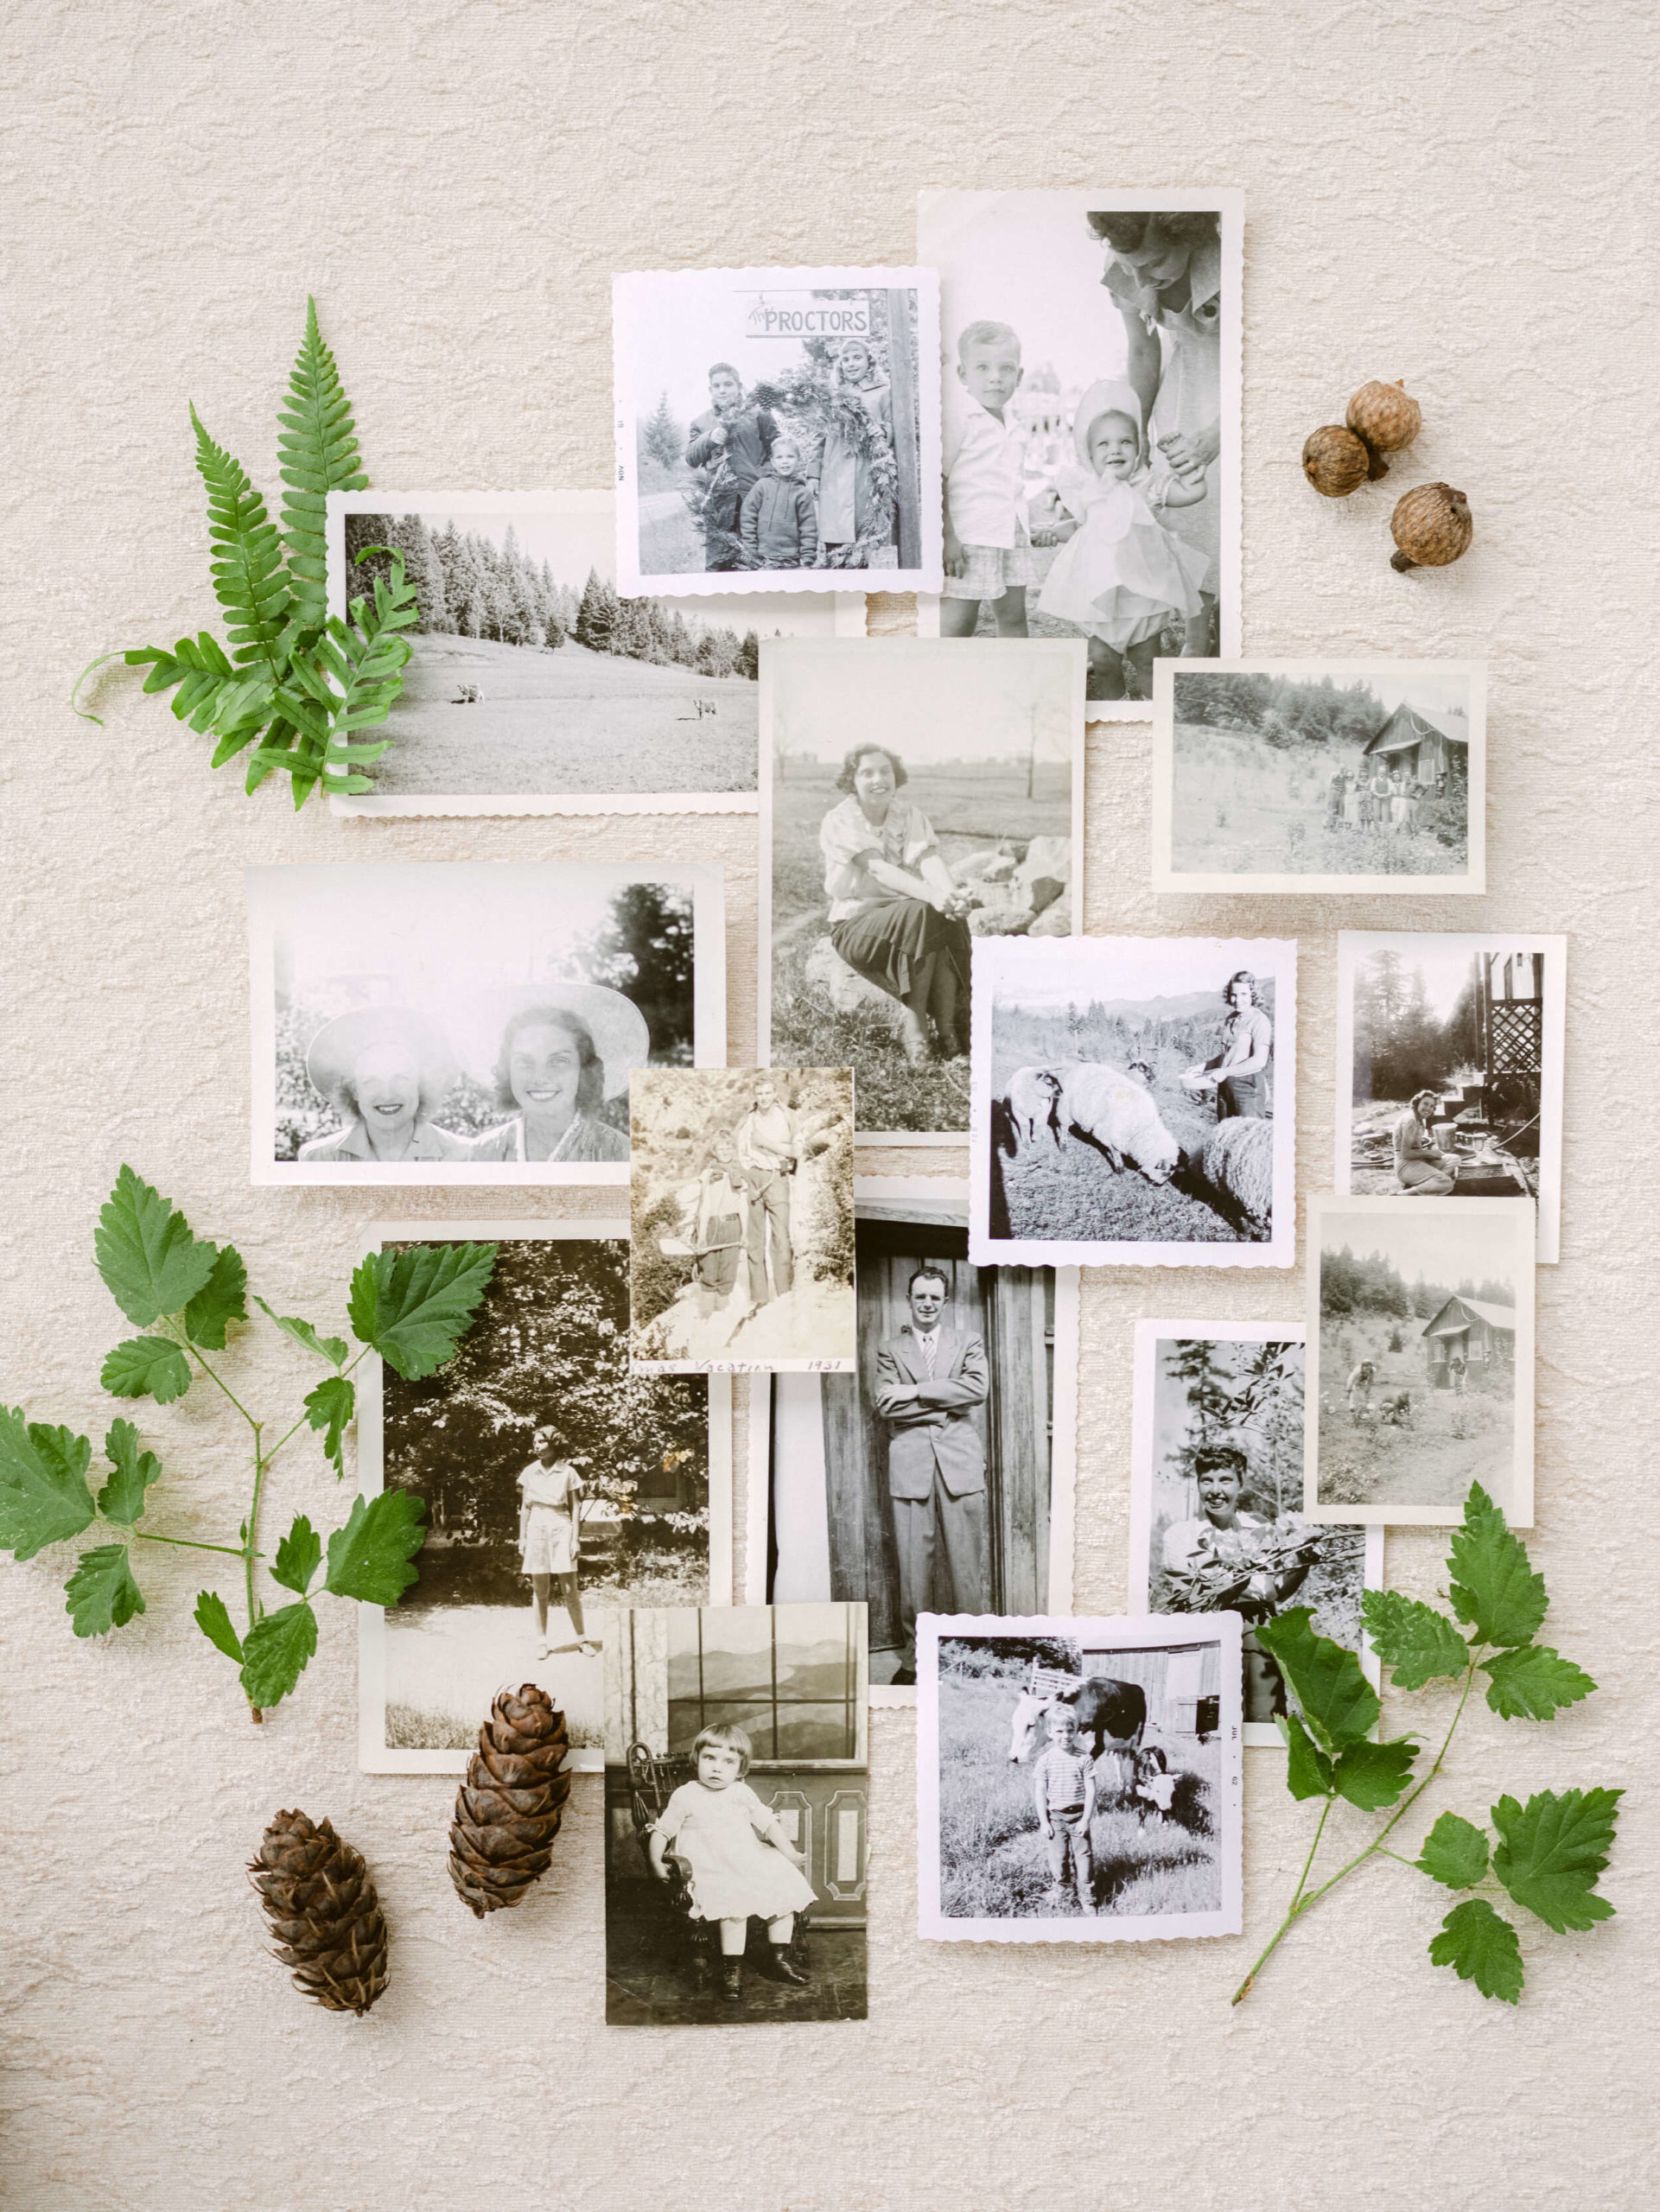 Joy Proctor finds inspiration and beauty creating at home with the KT Merry Presets.